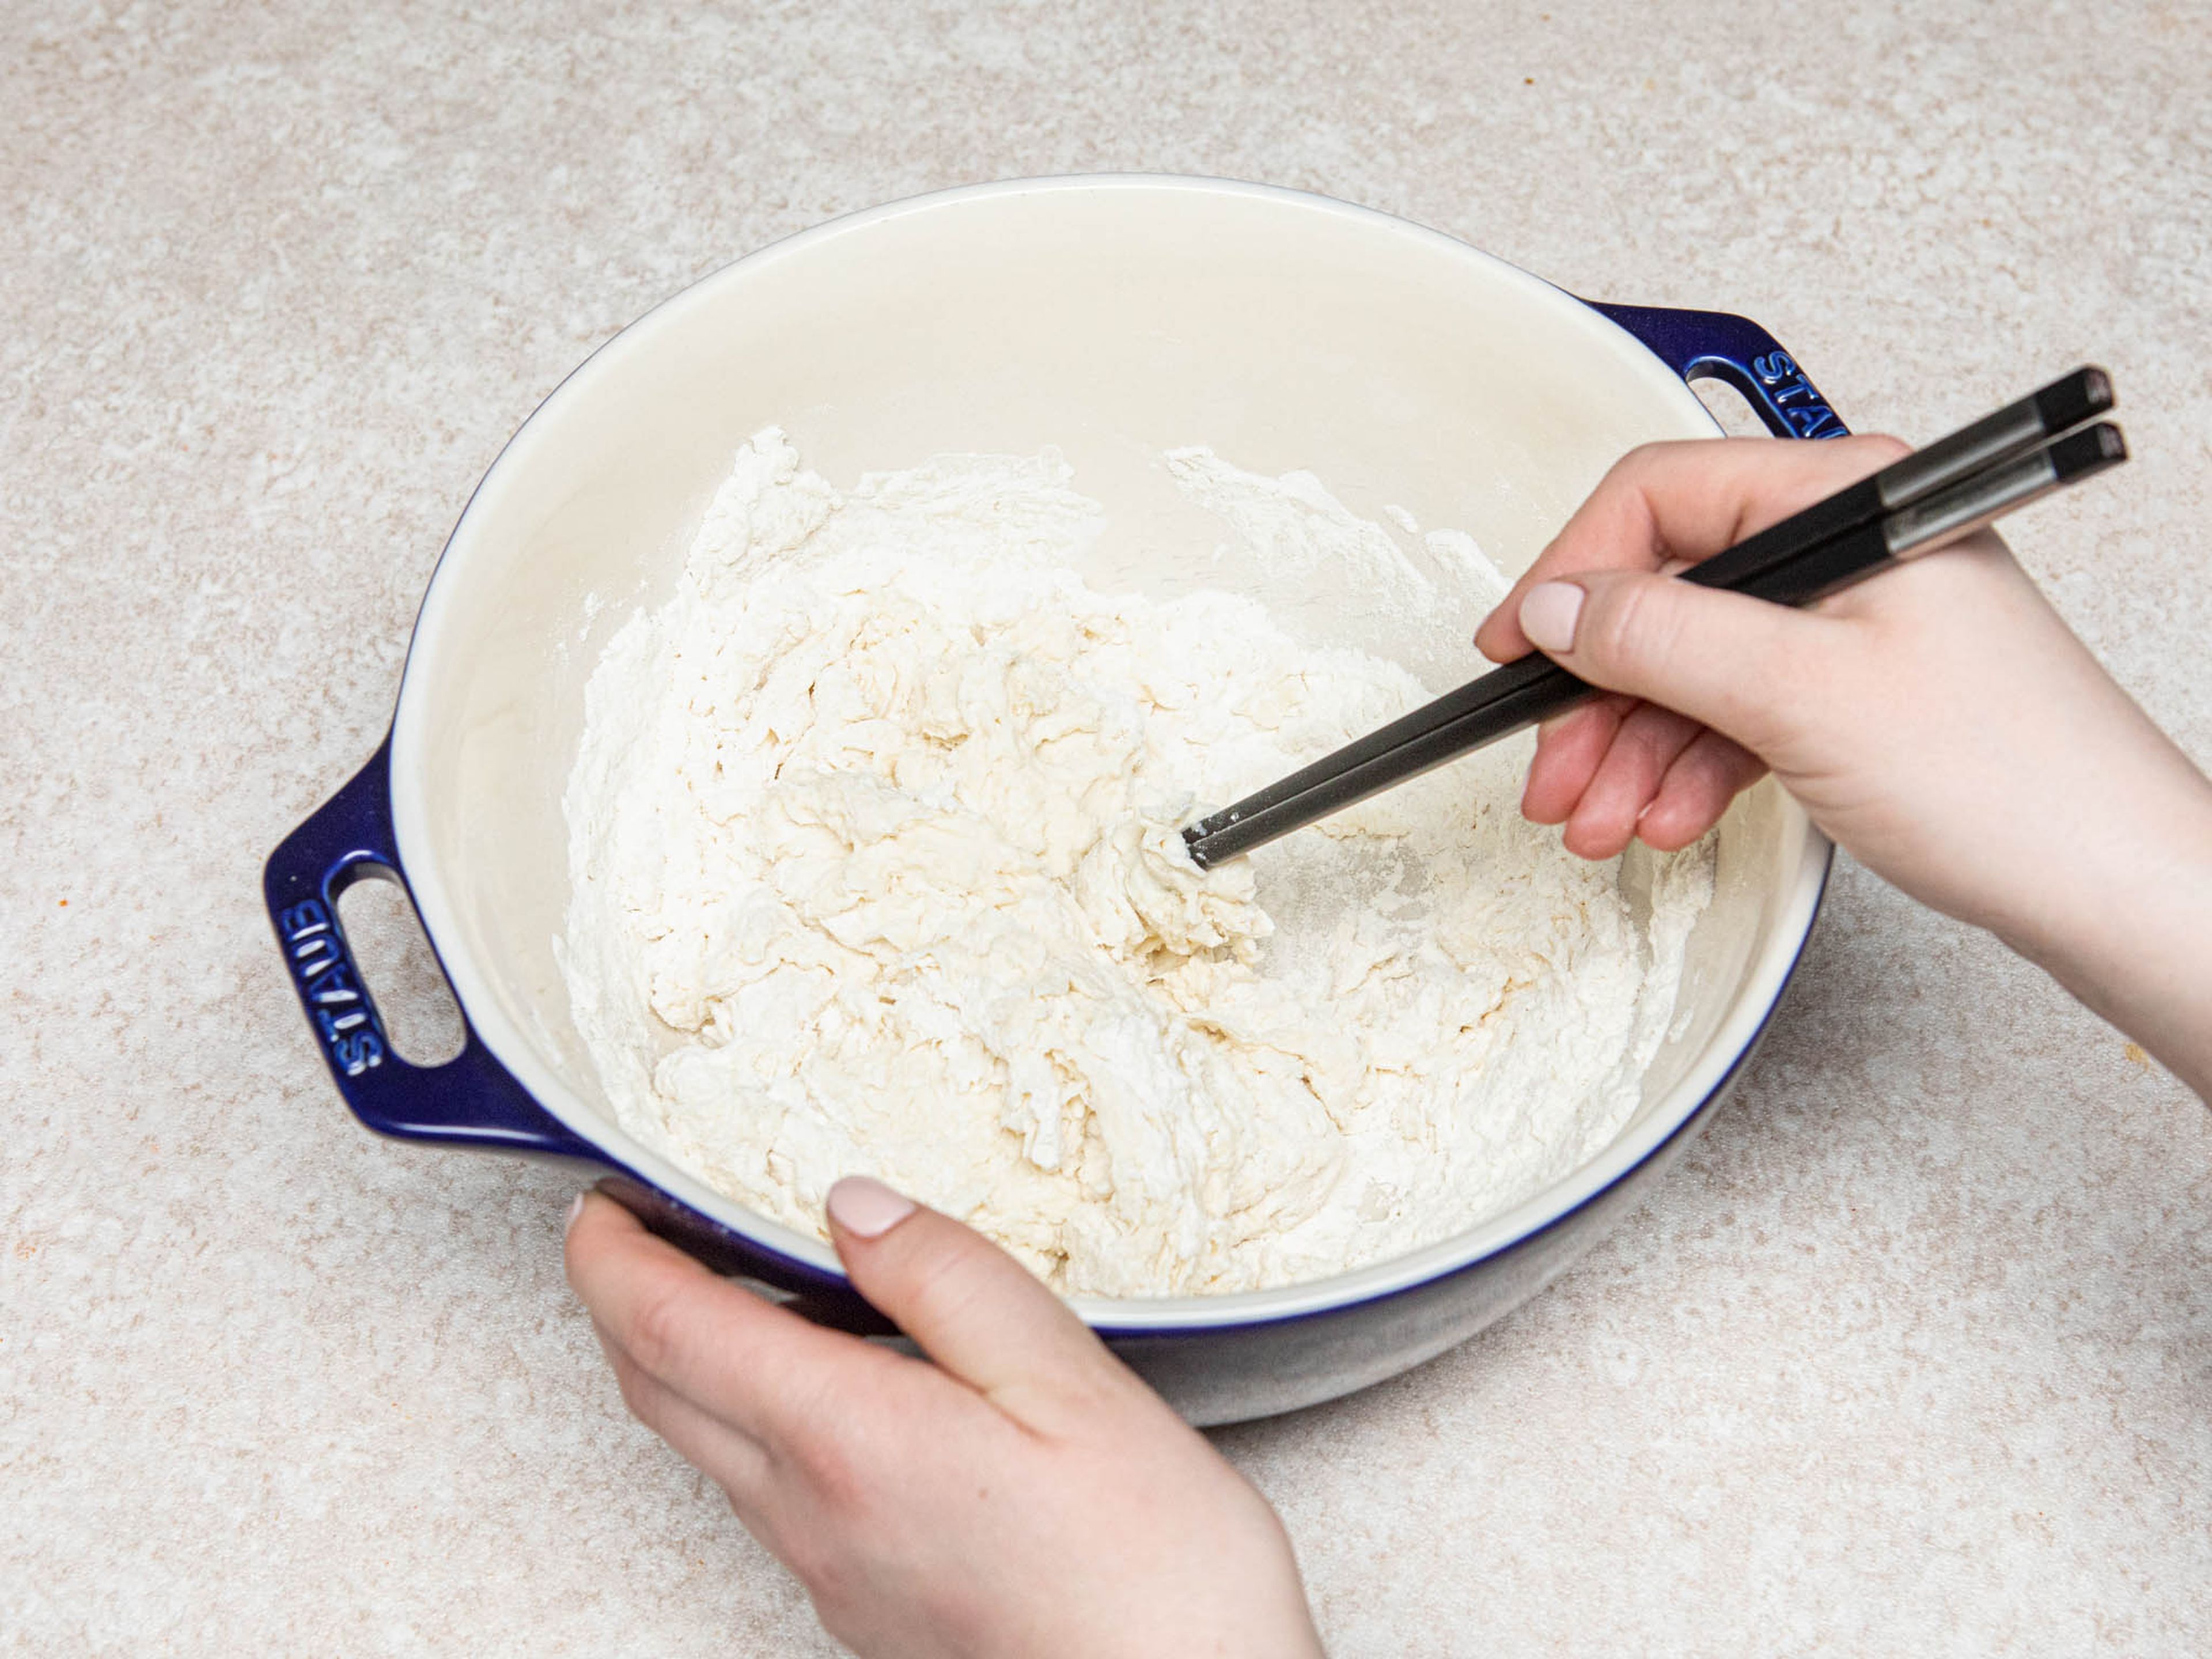 Mix flour and salt in a large bowl. Slowly stir in remaining water, using chopsticks or a wooden spoon to mix, then continue kneading with your hands until the dough is smooth. Cover and let rest for 20 min.